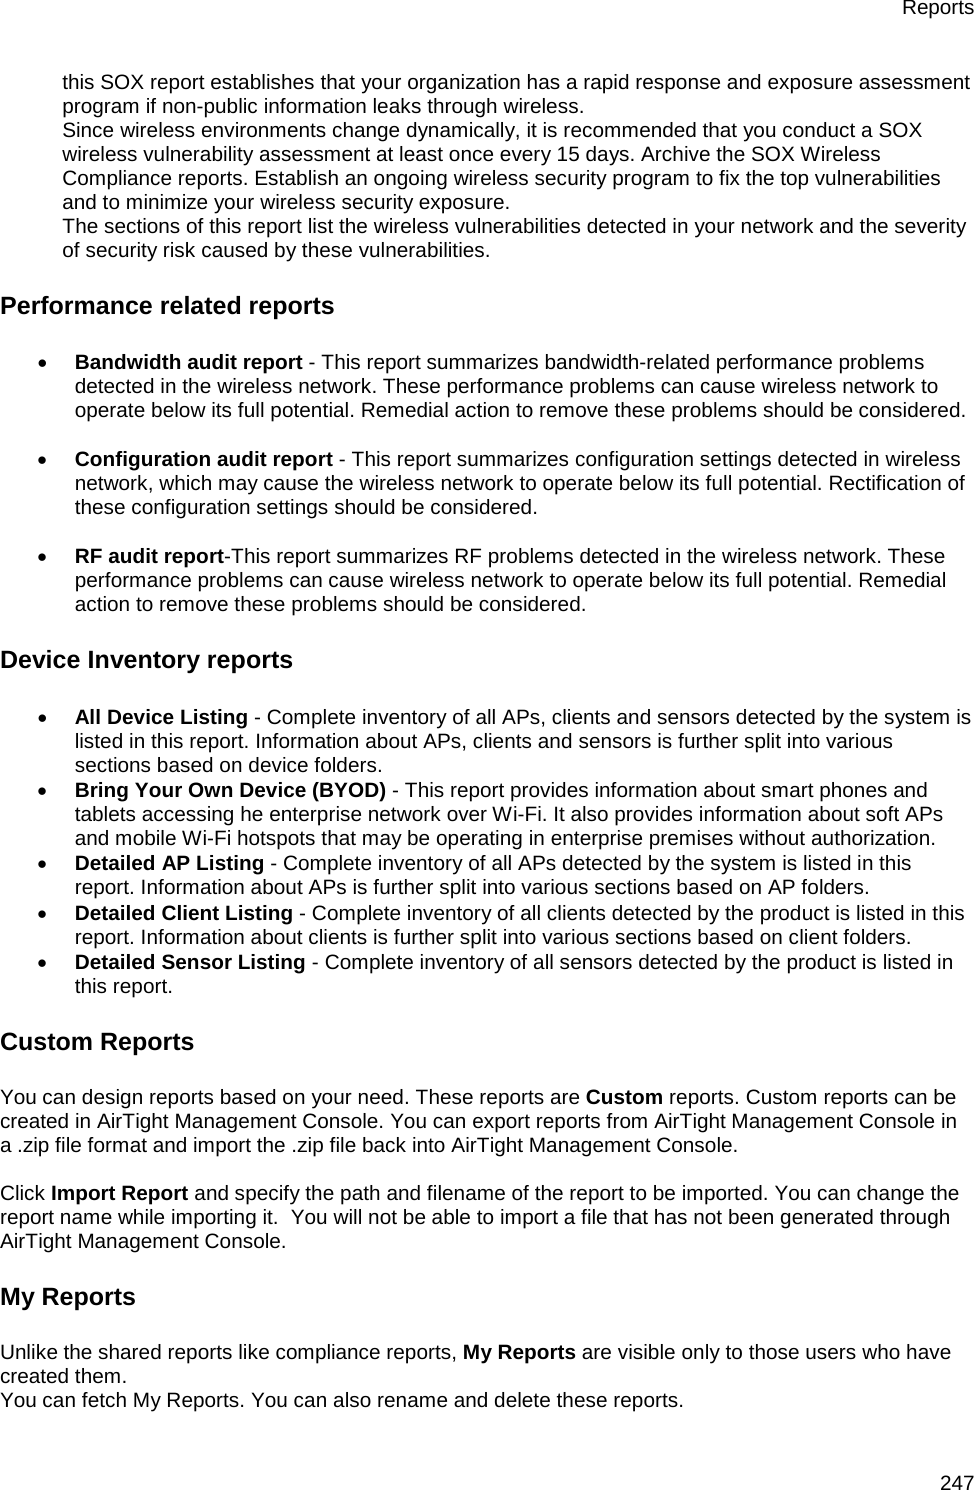 Reports 247 this SOX report establishes that your organization has a rapid response and exposure assessment program if non-public information leaks through wireless. Since wireless environments change dynamically, it is recommended that you conduct a SOX wireless vulnerability assessment at least once every 15 days. Archive the SOX Wireless Compliance reports. Establish an ongoing wireless security program to fix the top vulnerabilities and to minimize your wireless security exposure. The sections of this report list the wireless vulnerabilities detected in your network and the severity of security risk caused by these vulnerabilities. Performance related reports • Bandwidth audit report - This report summarizes bandwidth-related performance problems detected in the wireless network. These performance problems can cause wireless network to operate below its full potential. Remedial action to remove these problems should be considered.   • Configuration audit report - This report summarizes configuration settings detected in wireless network, which may cause the wireless network to operate below its full potential. Rectification of these configuration settings should be considered.   • RF audit report-This report summarizes RF problems detected in the wireless network. These performance problems can cause wireless network to operate below its full potential. Remedial action to remove these problems should be considered. Device Inventory reports • All Device Listing - Complete inventory of all APs, clients and sensors detected by the system is listed in this report. Information about APs, clients and sensors is further split into various sections based on device folders. • Bring Your Own Device (BYOD) - This report provides information about smart phones and tablets accessing he enterprise network over Wi-Fi. It also provides information about soft APs and mobile Wi-Fi hotspots that may be operating in enterprise premises without authorization. • Detailed AP Listing - Complete inventory of all APs detected by the system is listed in this report. Information about APs is further split into various sections based on AP folders. • Detailed Client Listing - Complete inventory of all clients detected by the product is listed in this report. Information about clients is further split into various sections based on client folders. • Detailed Sensor Listing - Complete inventory of all sensors detected by the product is listed in this report. Custom Reports You can design reports based on your need. These reports are Custom reports. Custom reports can be created in AirTight Management Console. You can export reports from AirTight Management Console in a .zip file format and import the .zip file back into AirTight Management Console.   Click Import Report and specify the path and filename of the report to be imported. You can change the report name while importing it.  You will not be able to import a file that has not been generated through AirTight Management Console. My Reports Unlike the shared reports like compliance reports, My Reports are visible only to those users who have created them. You can fetch My Reports. You can also rename and delete these reports. 